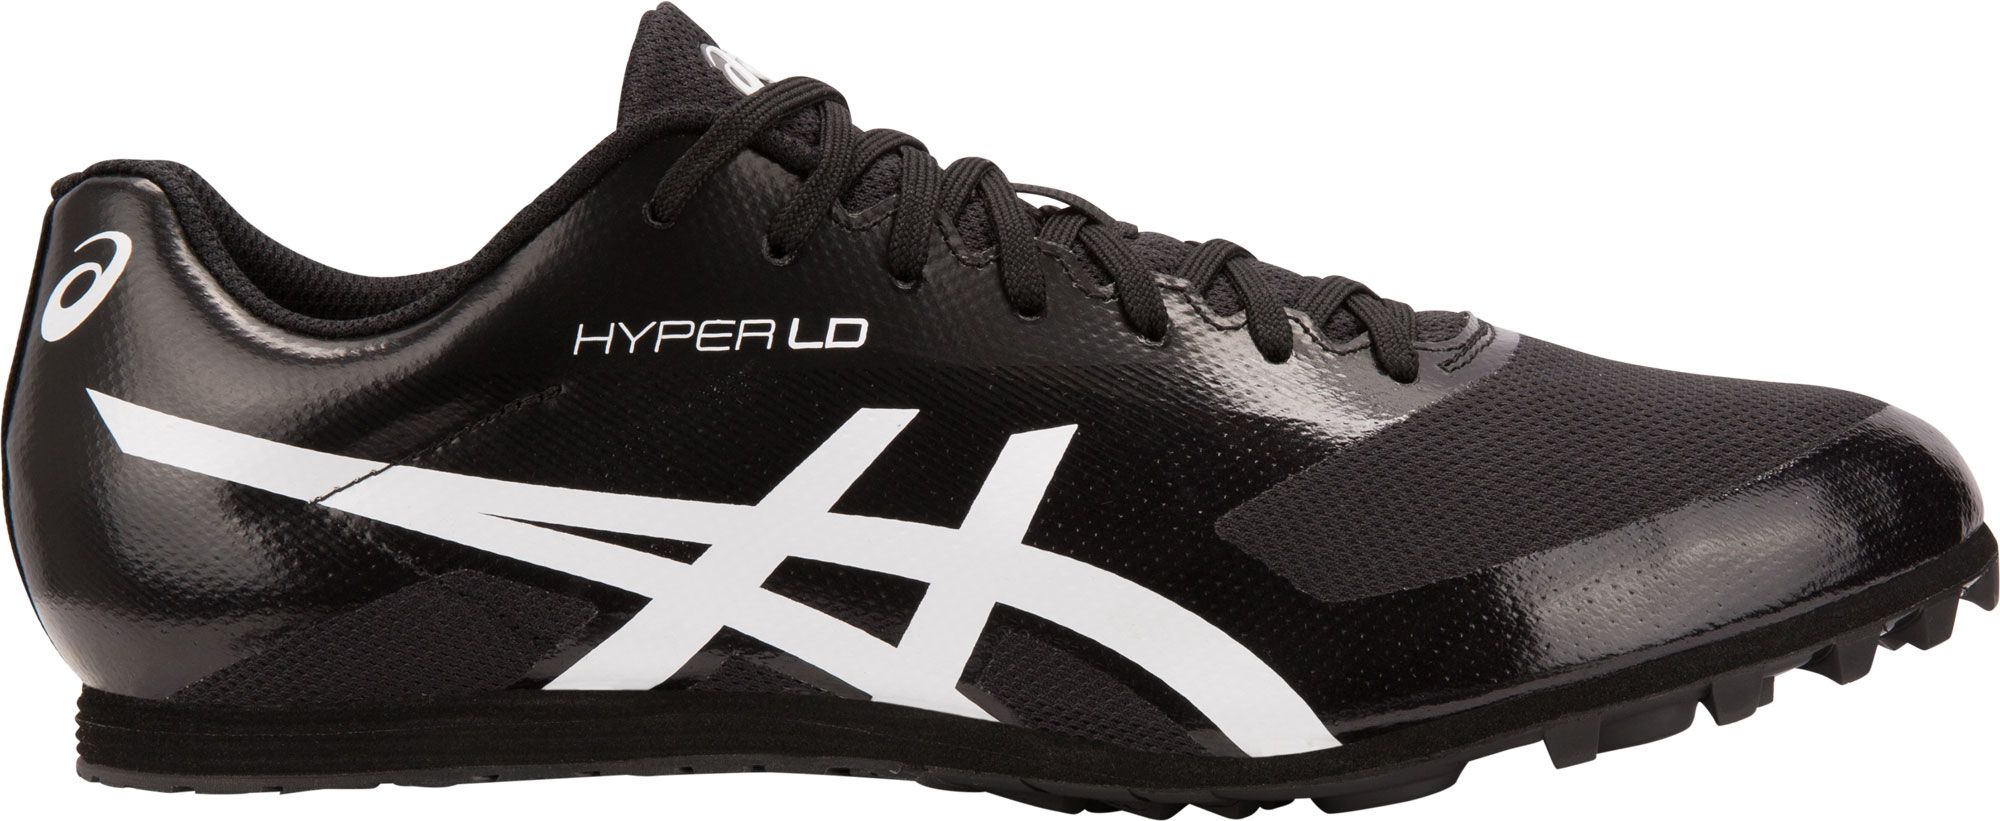 Hyper LD 6 Track and Field Shoes 